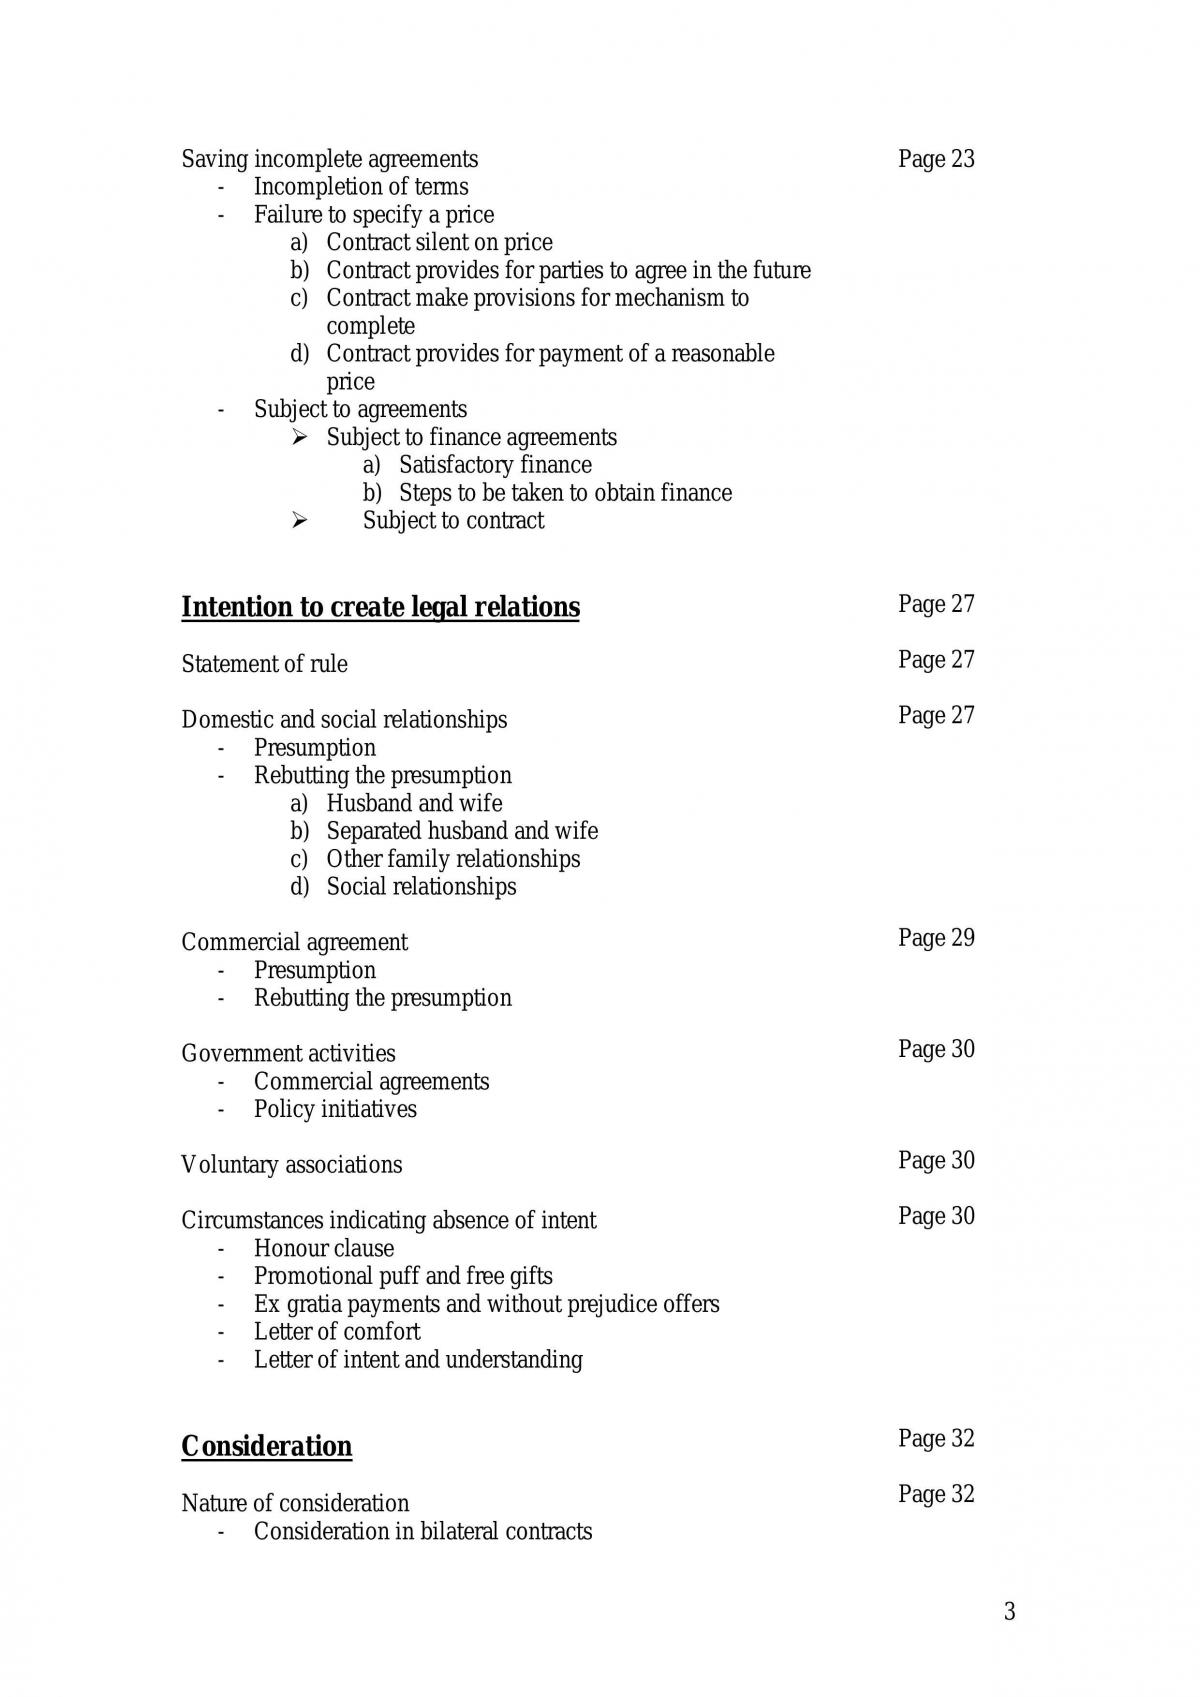 Complete Contracts Study Notes - Page 3